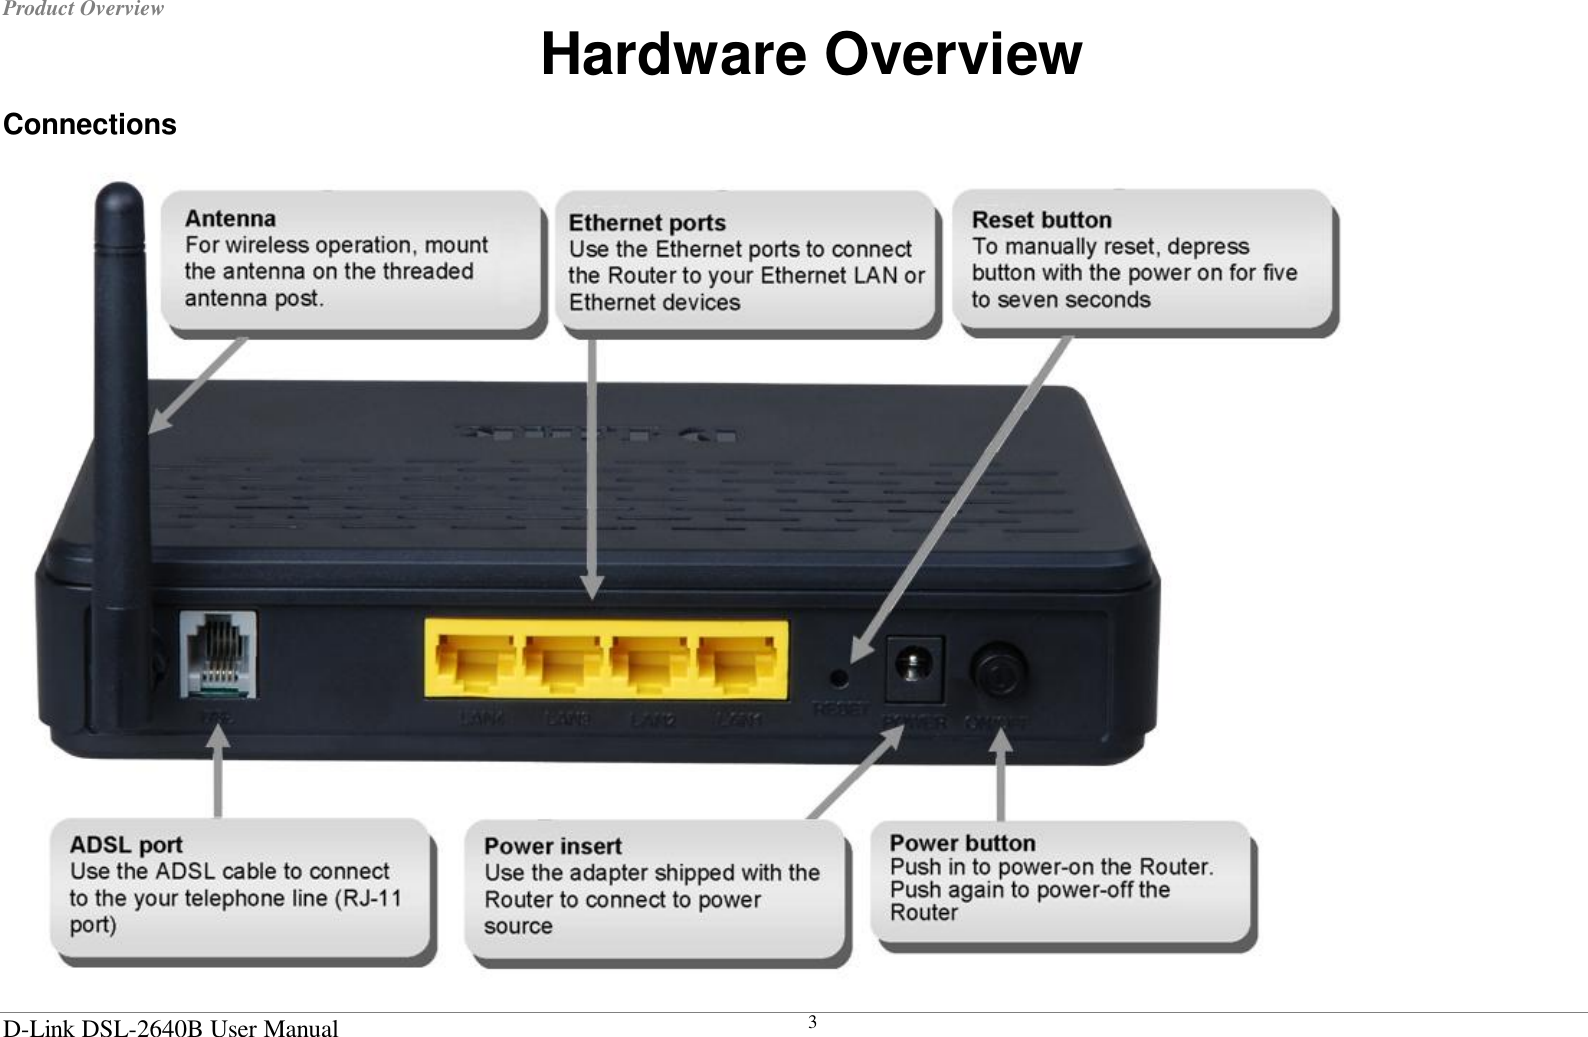 Product Overview  D-Link DSL-2640B User Manual 3Hardware Overview Connections  